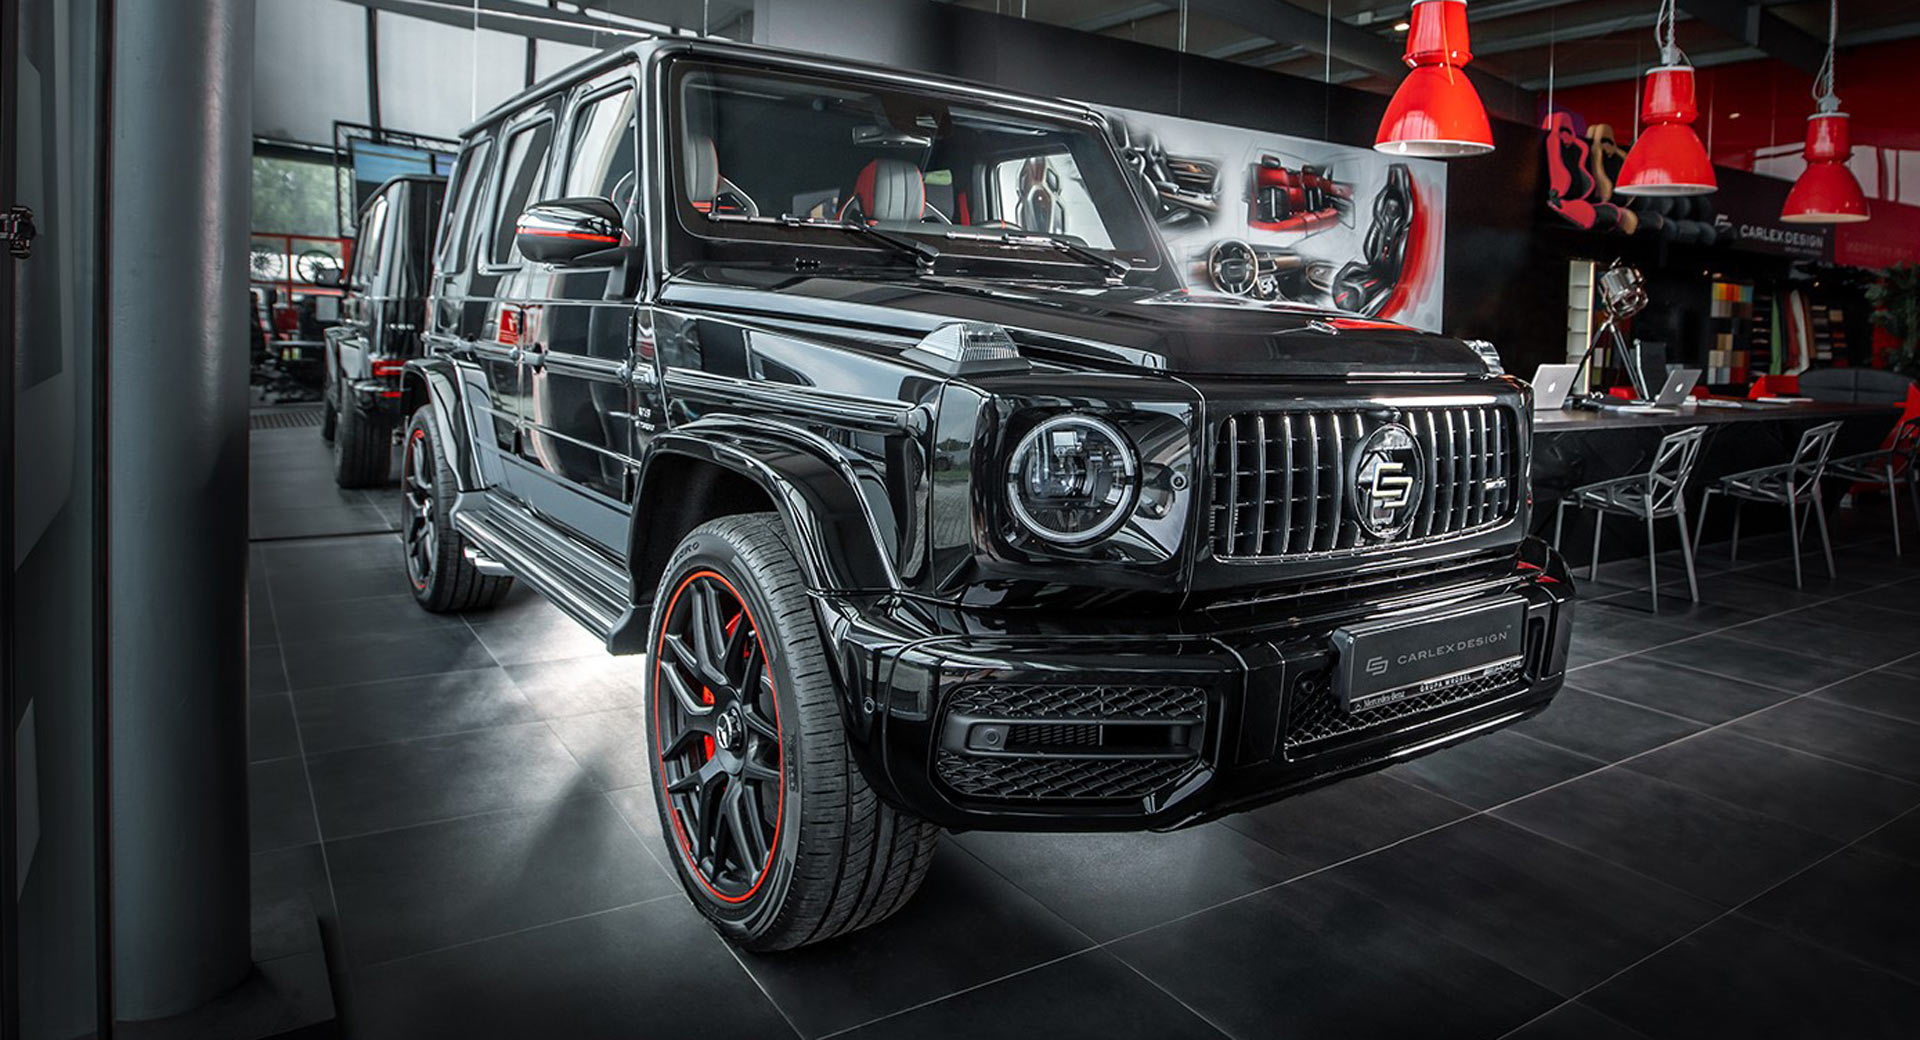 Mercedes Benz G Class By Carlex Makes You Think You Re Inside A Sports Car Carscoops